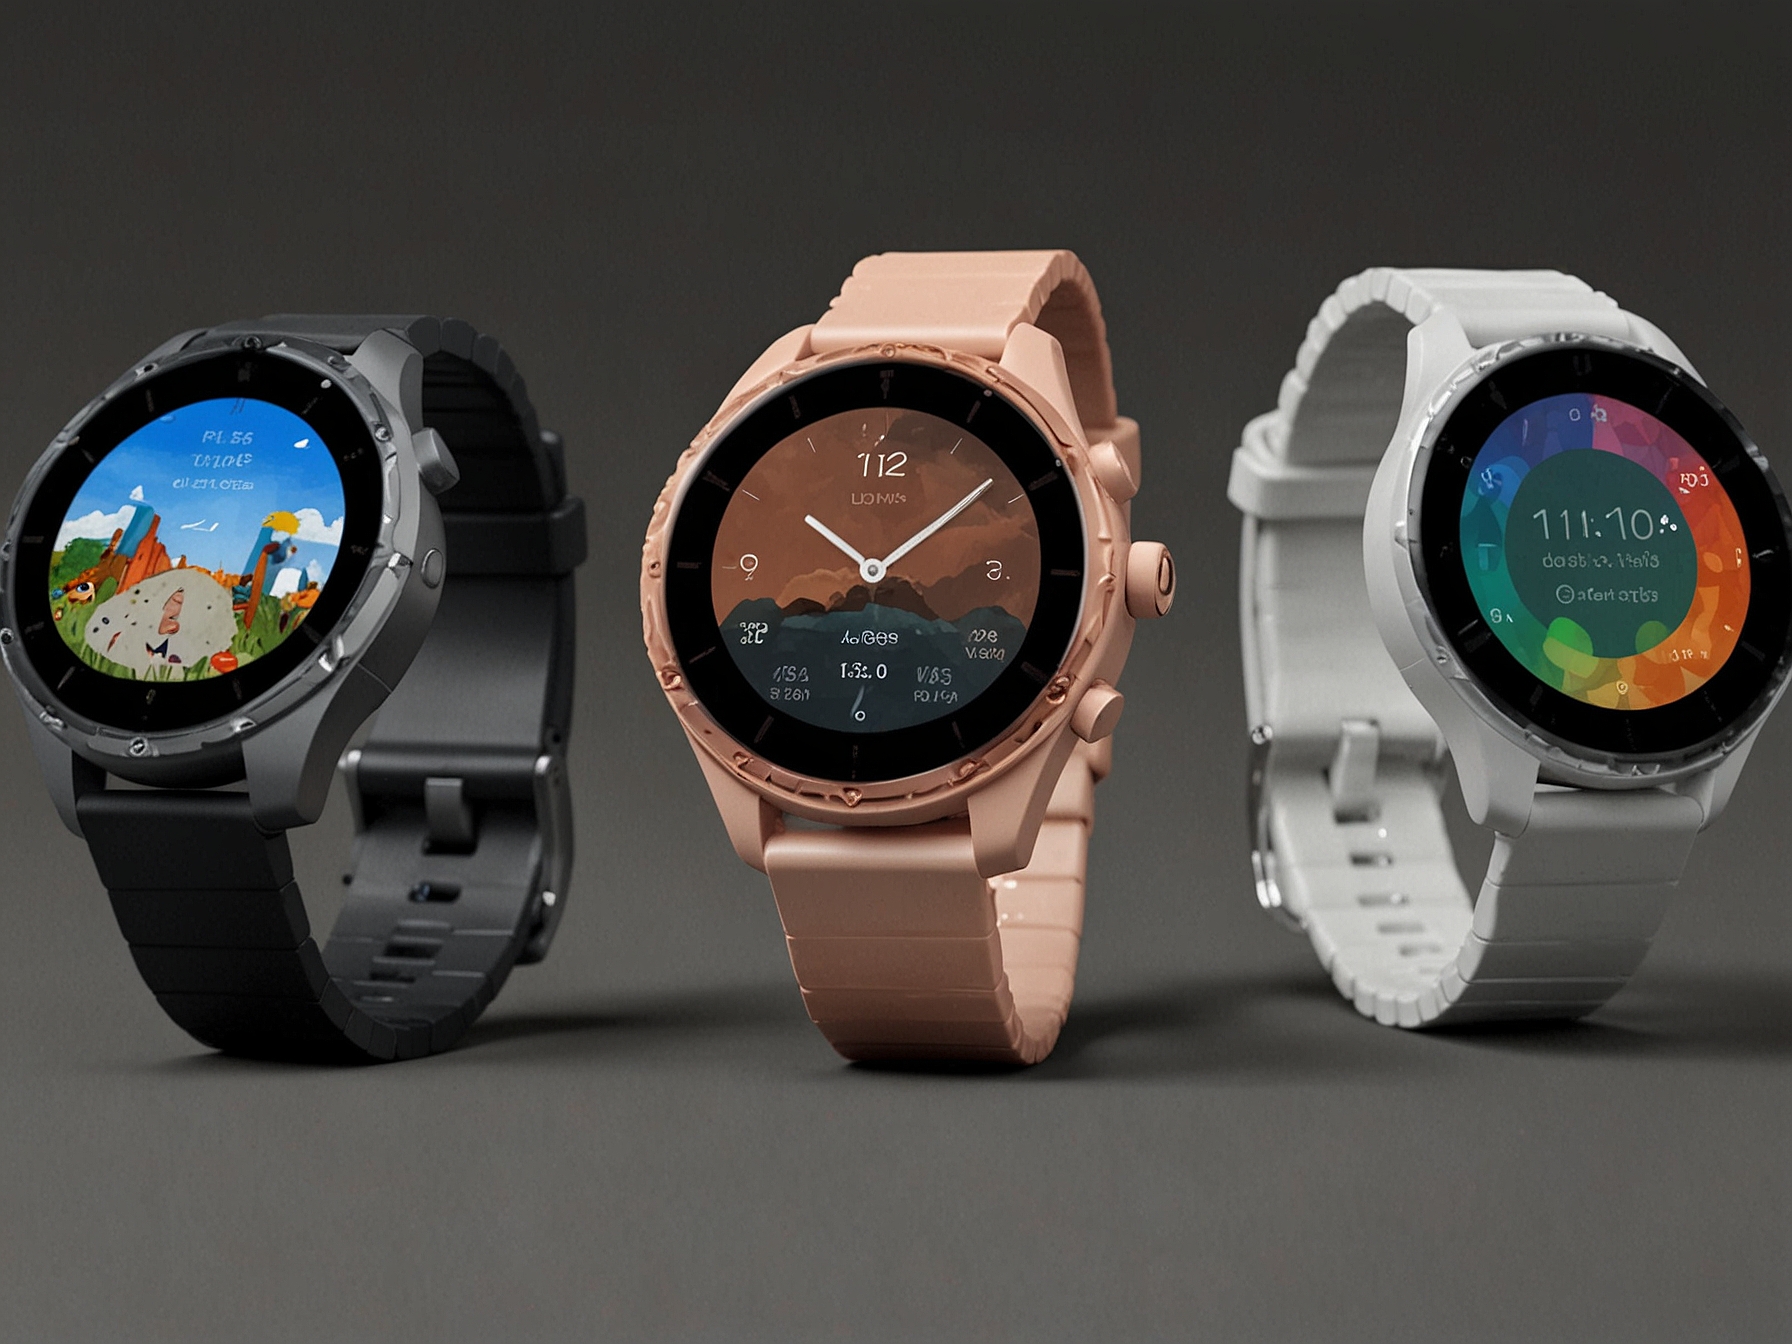 An image showcasing the upcoming Pixel Watch 3 models, depicting various designs and color options available to consumers.